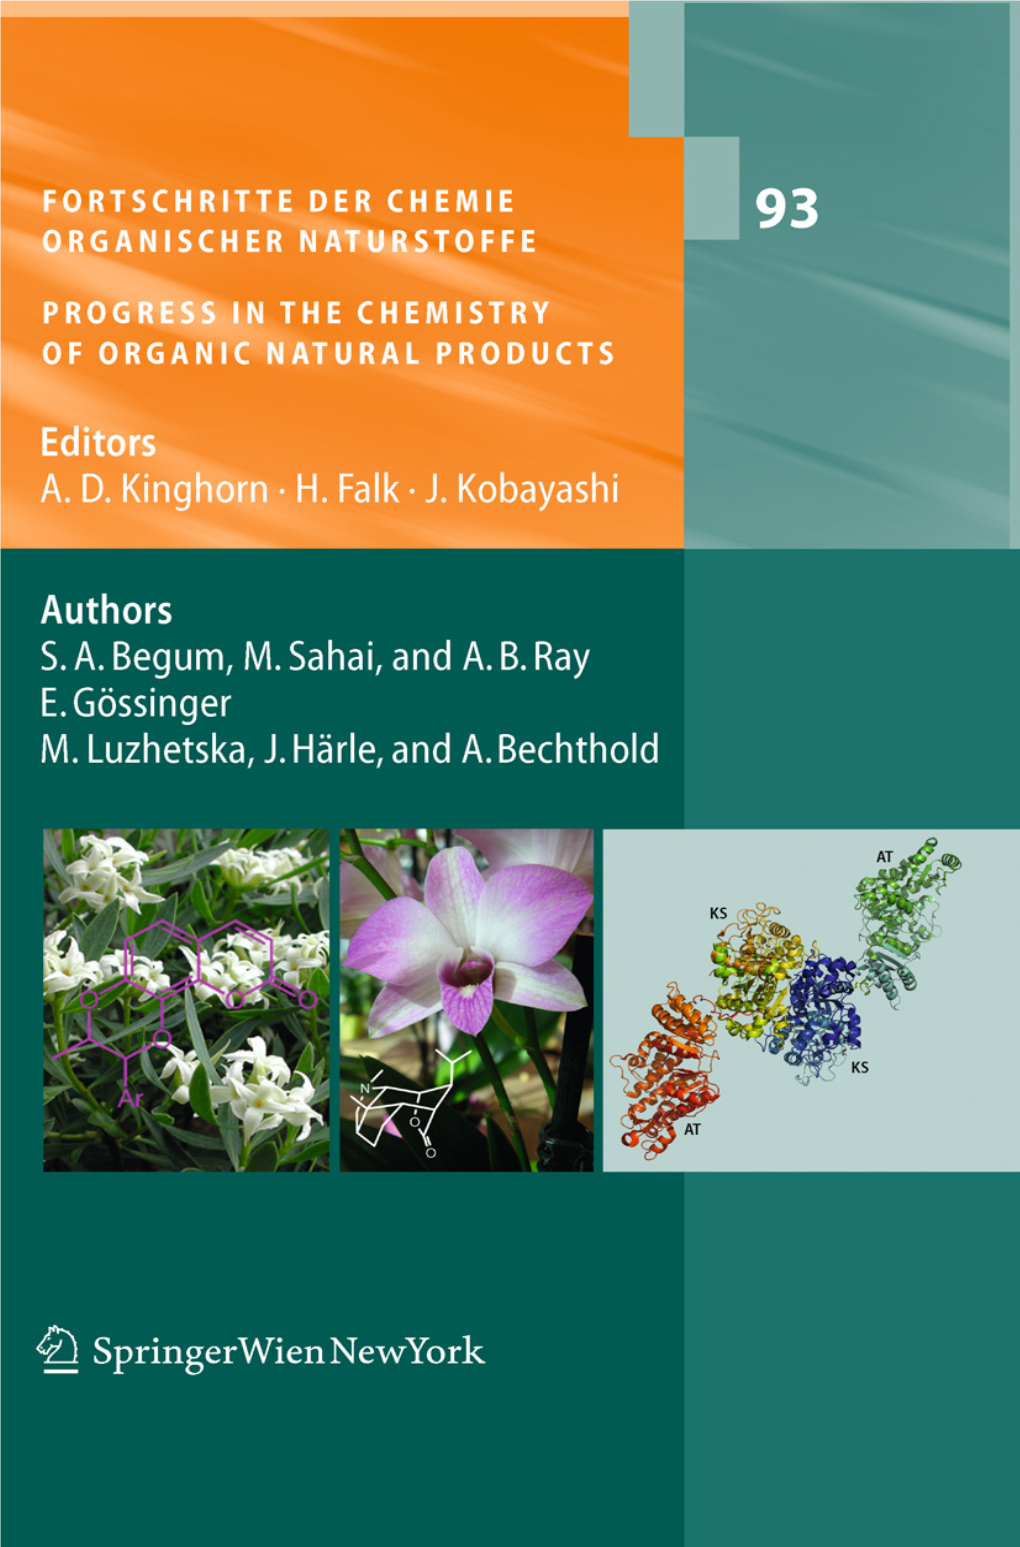 Progress in the Chemistry of Organic Natural Products, Vol. 93, DOI 10.1007/978-3-7091-0140-7 1, # Springer-Verlag/Wien 2010 2 S.A